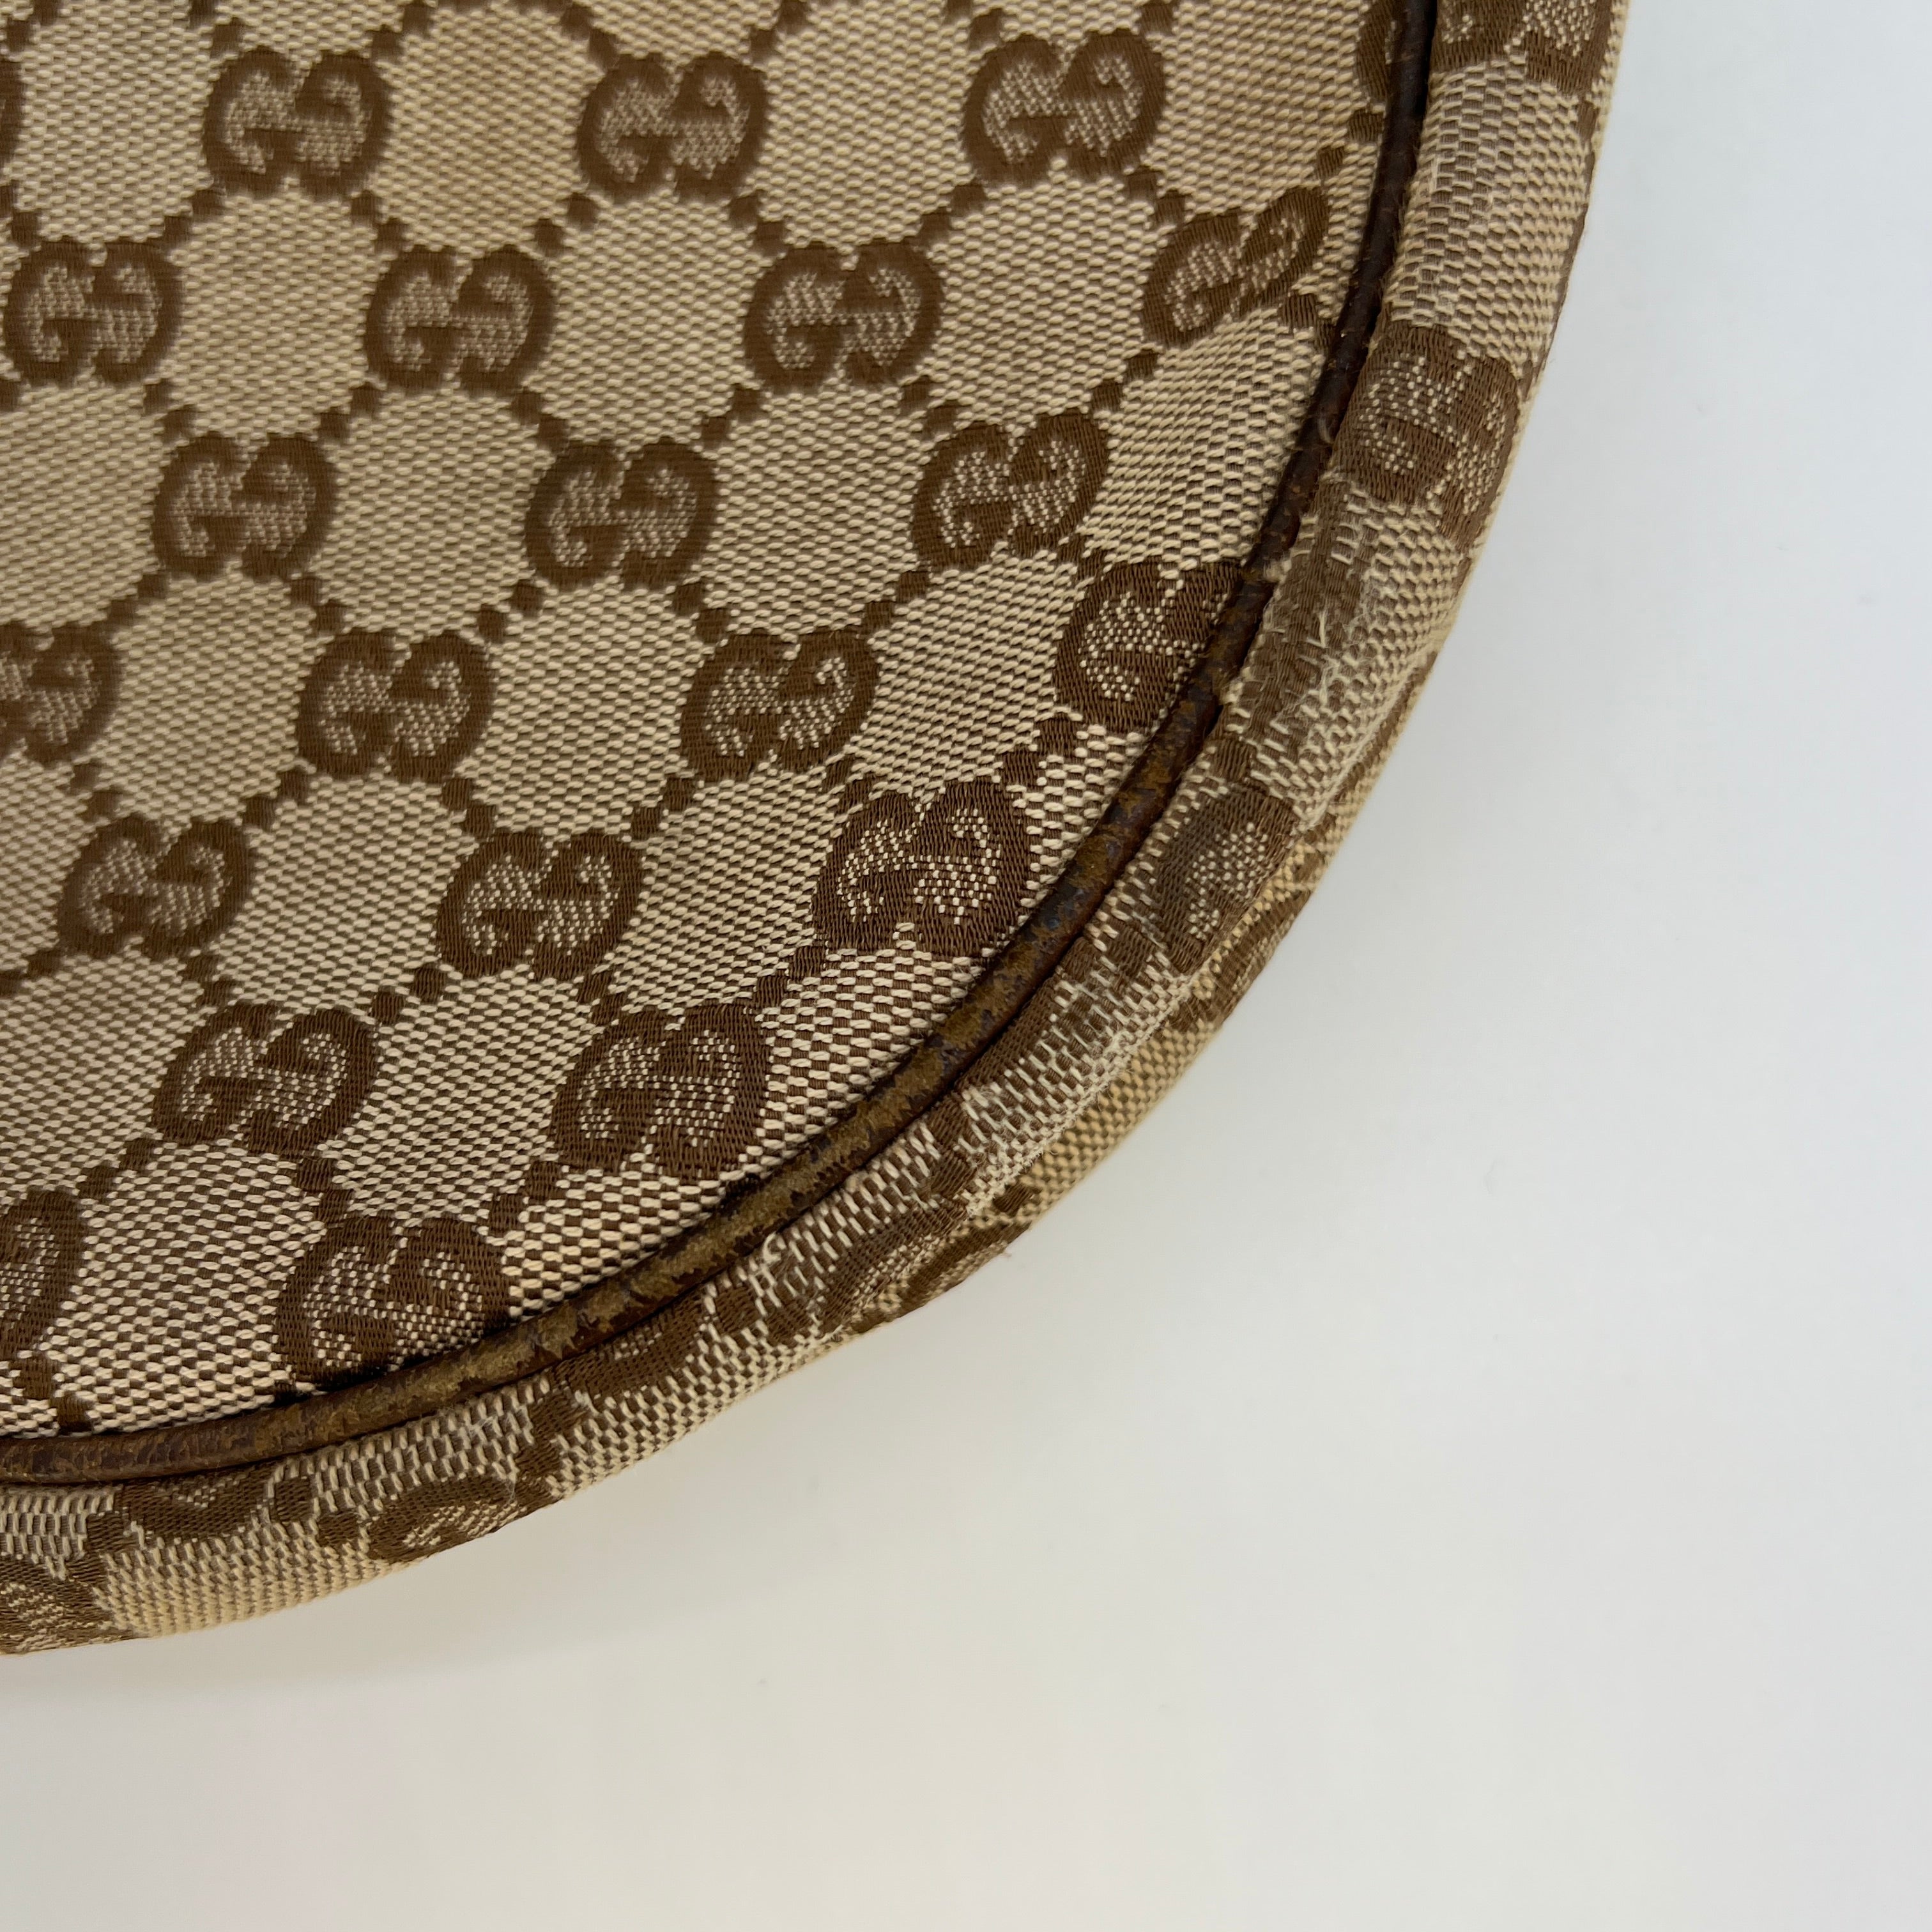 Gucci 70s tan/brown coated canvas & leather monogram hobo bag w/ charm,  dust bag